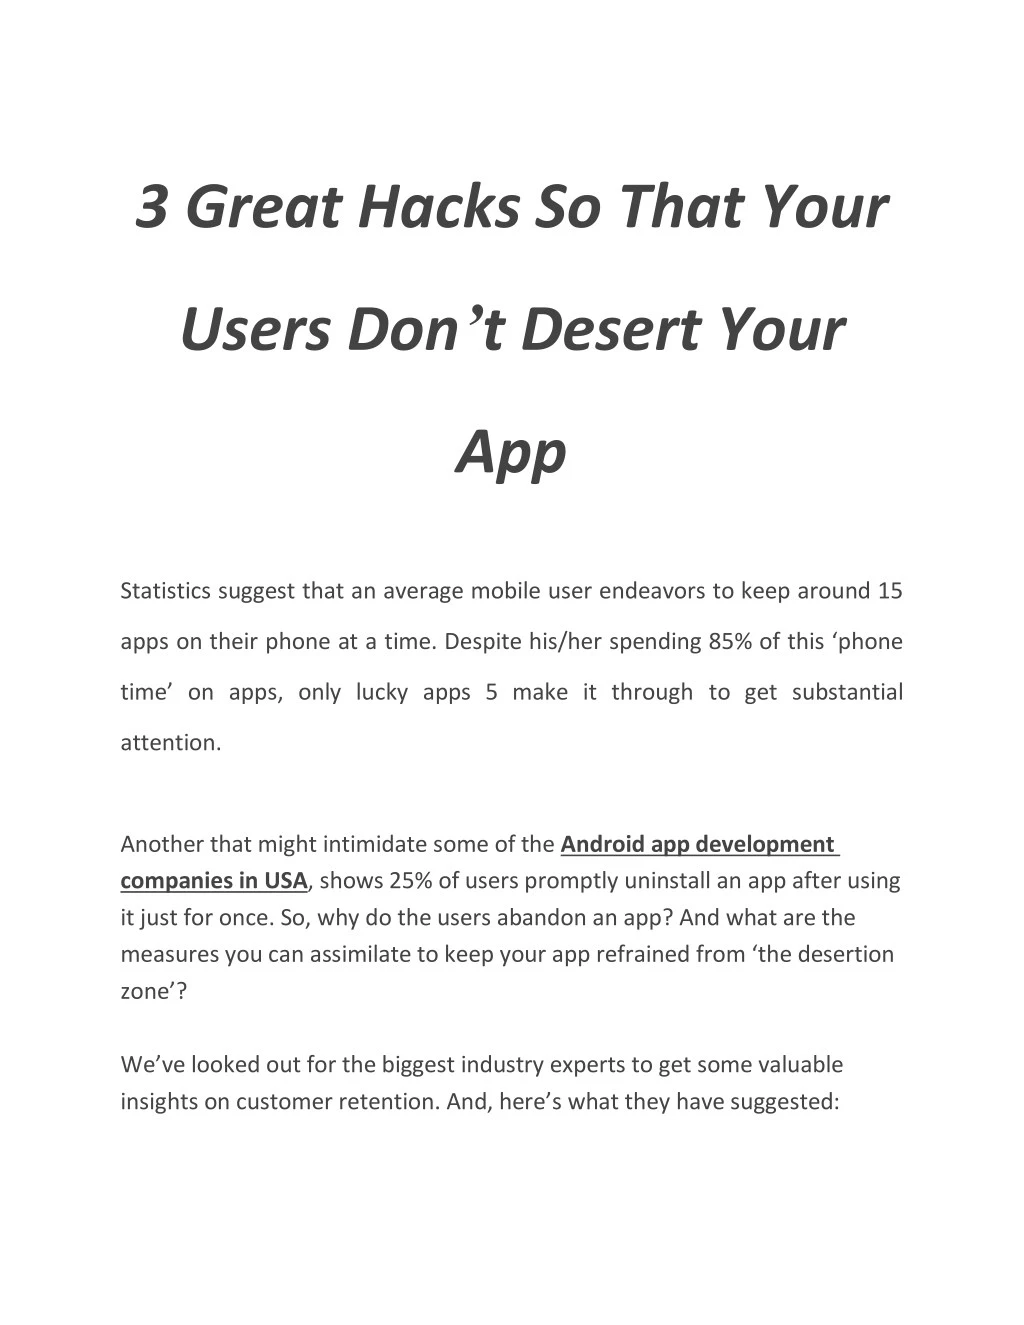 3 great hacks so that your